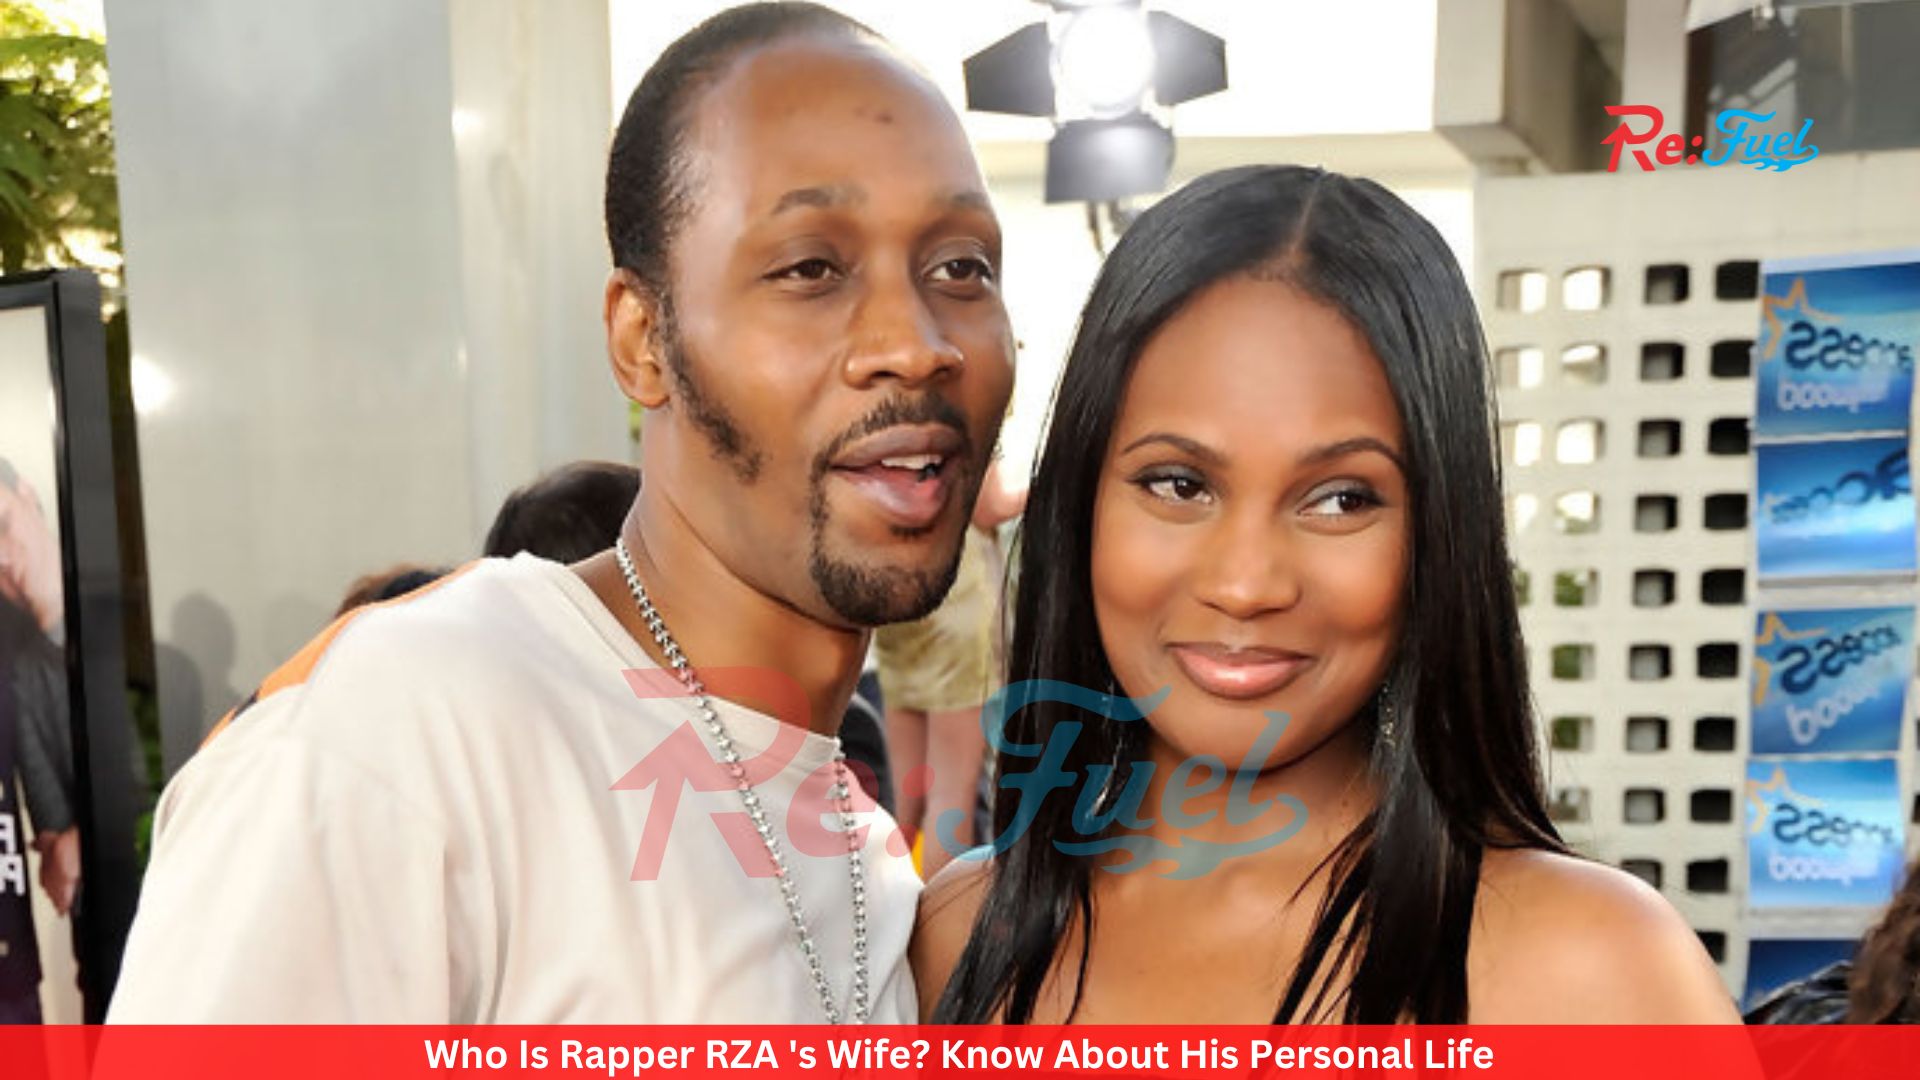 Who Is Rapper RZA 's Wife? Know About His Personal Life